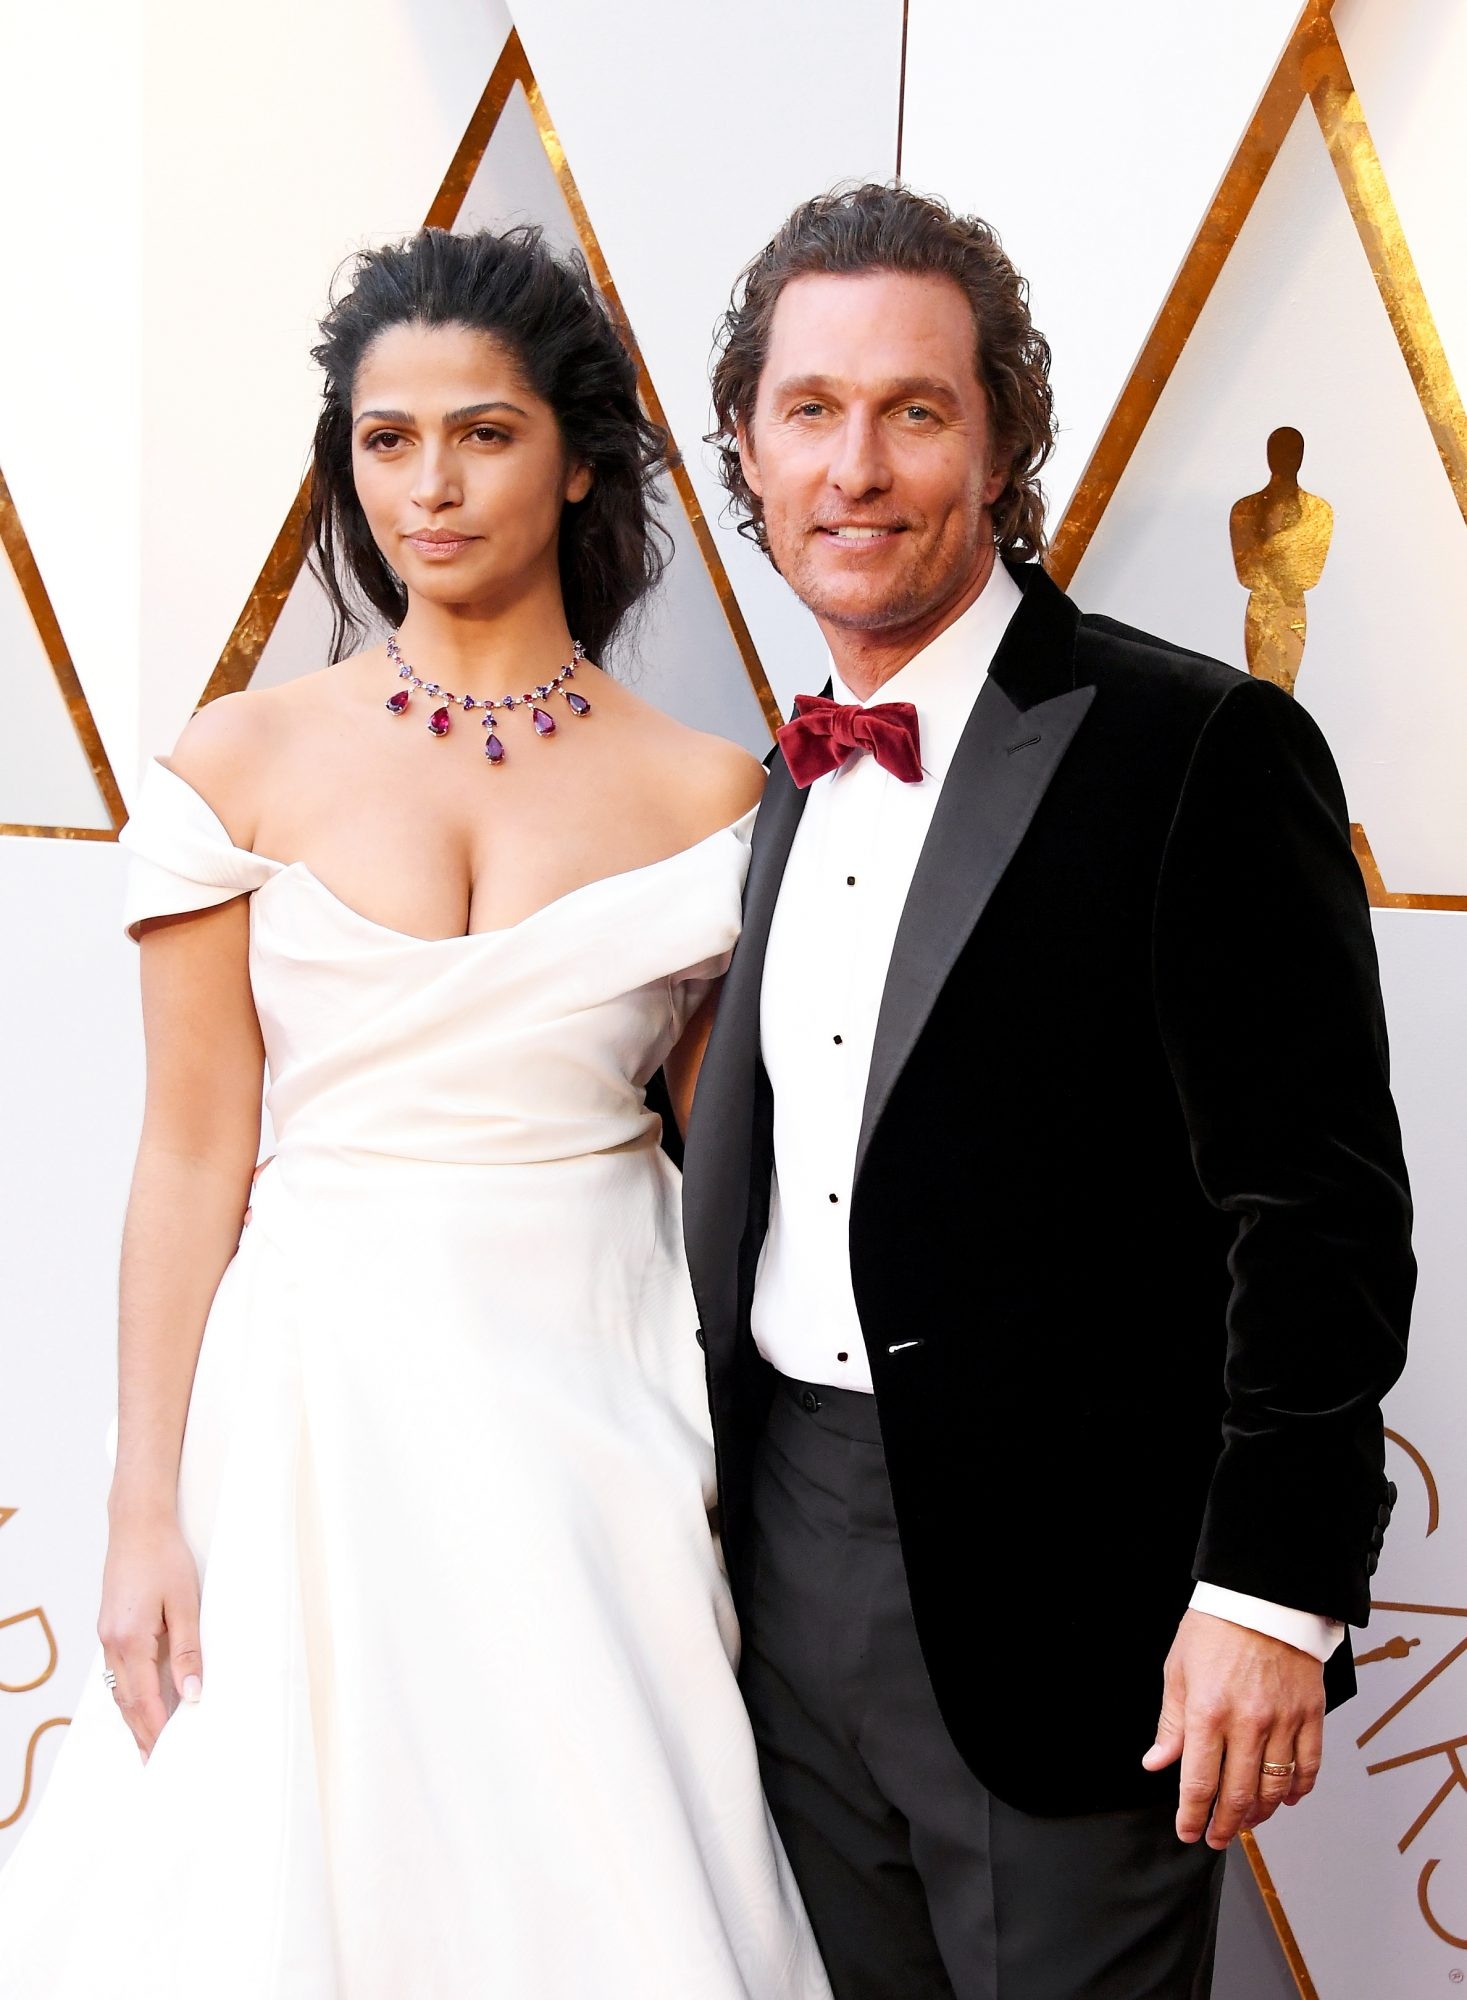 Matthew McConaughey and Camila Alves Wallpapers (25+ images inside)